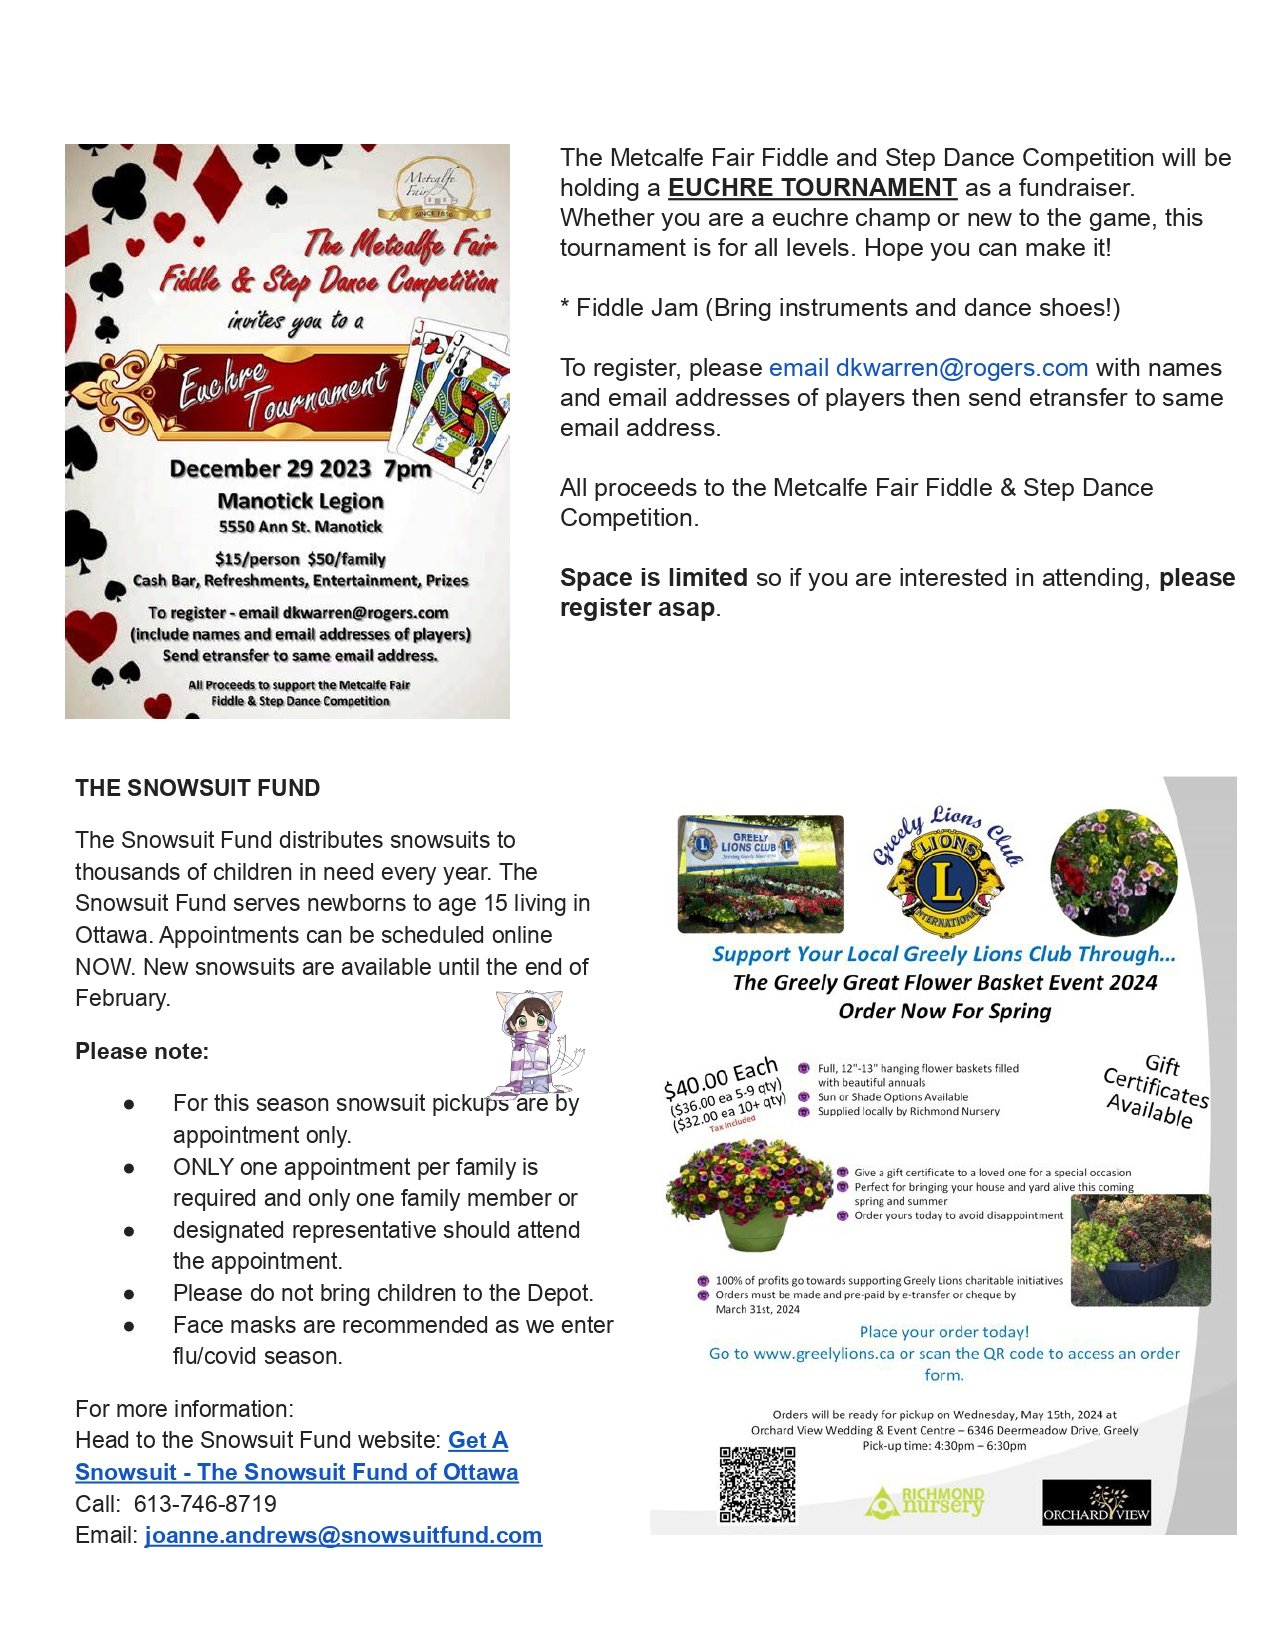 659adaac0f8083003aba7062_Dec 10 Newsletter_link to service.pdf_page-0010.jpg